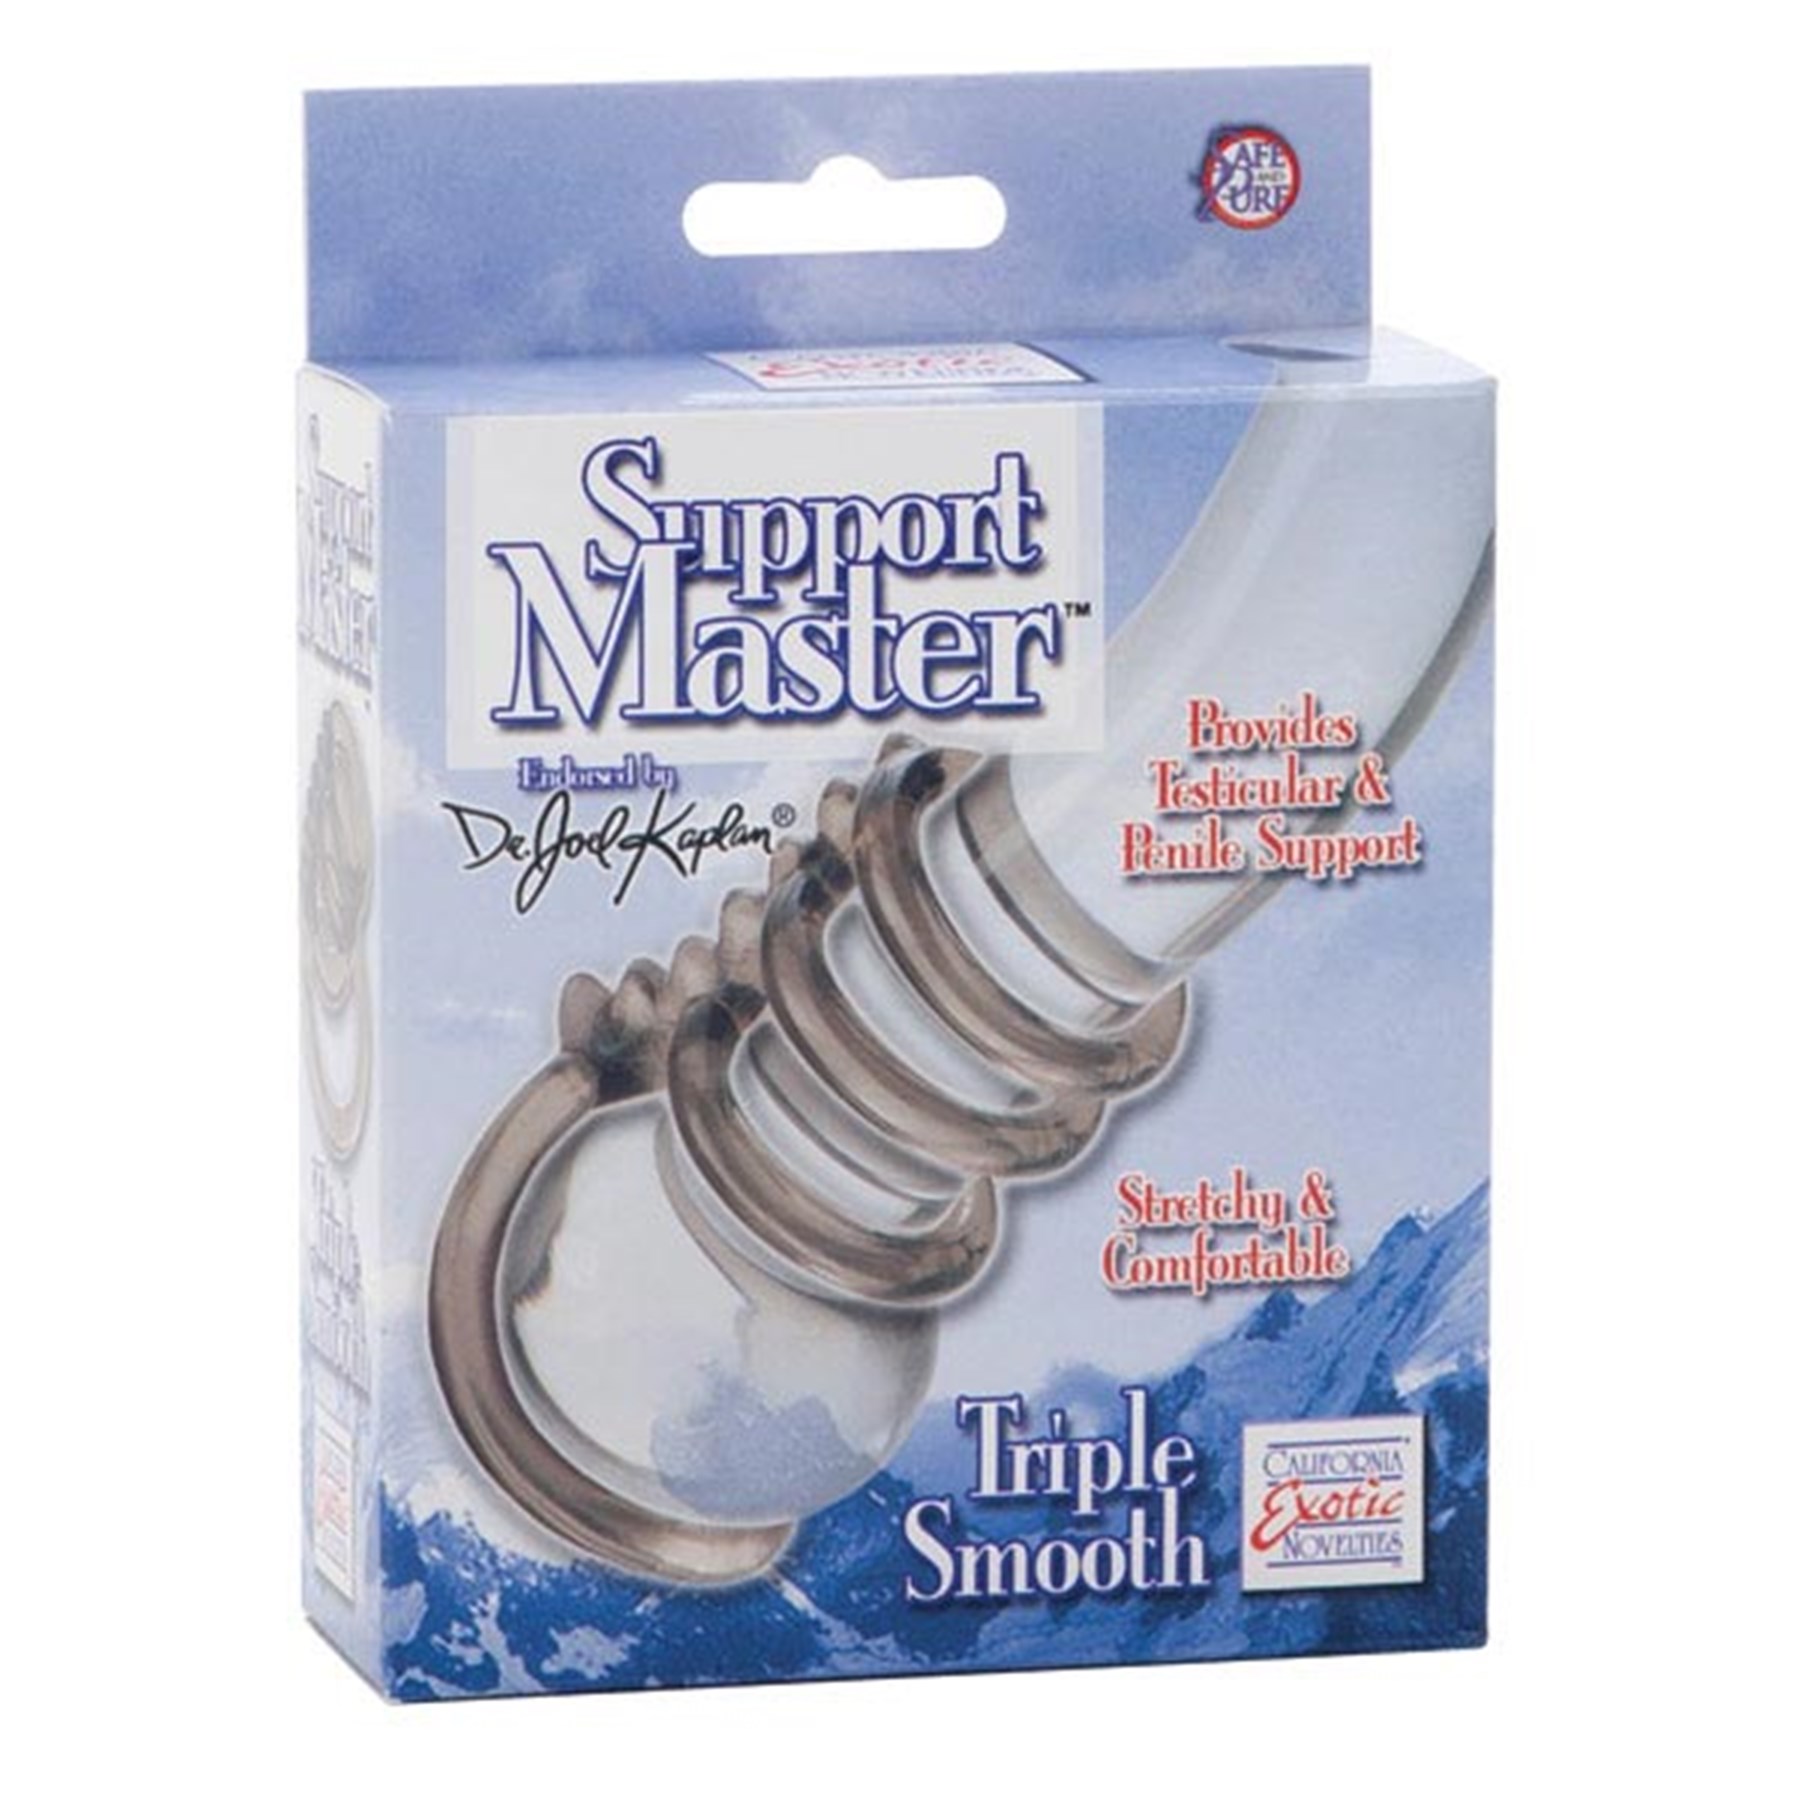 support-master-triple-smooth-cock-ring